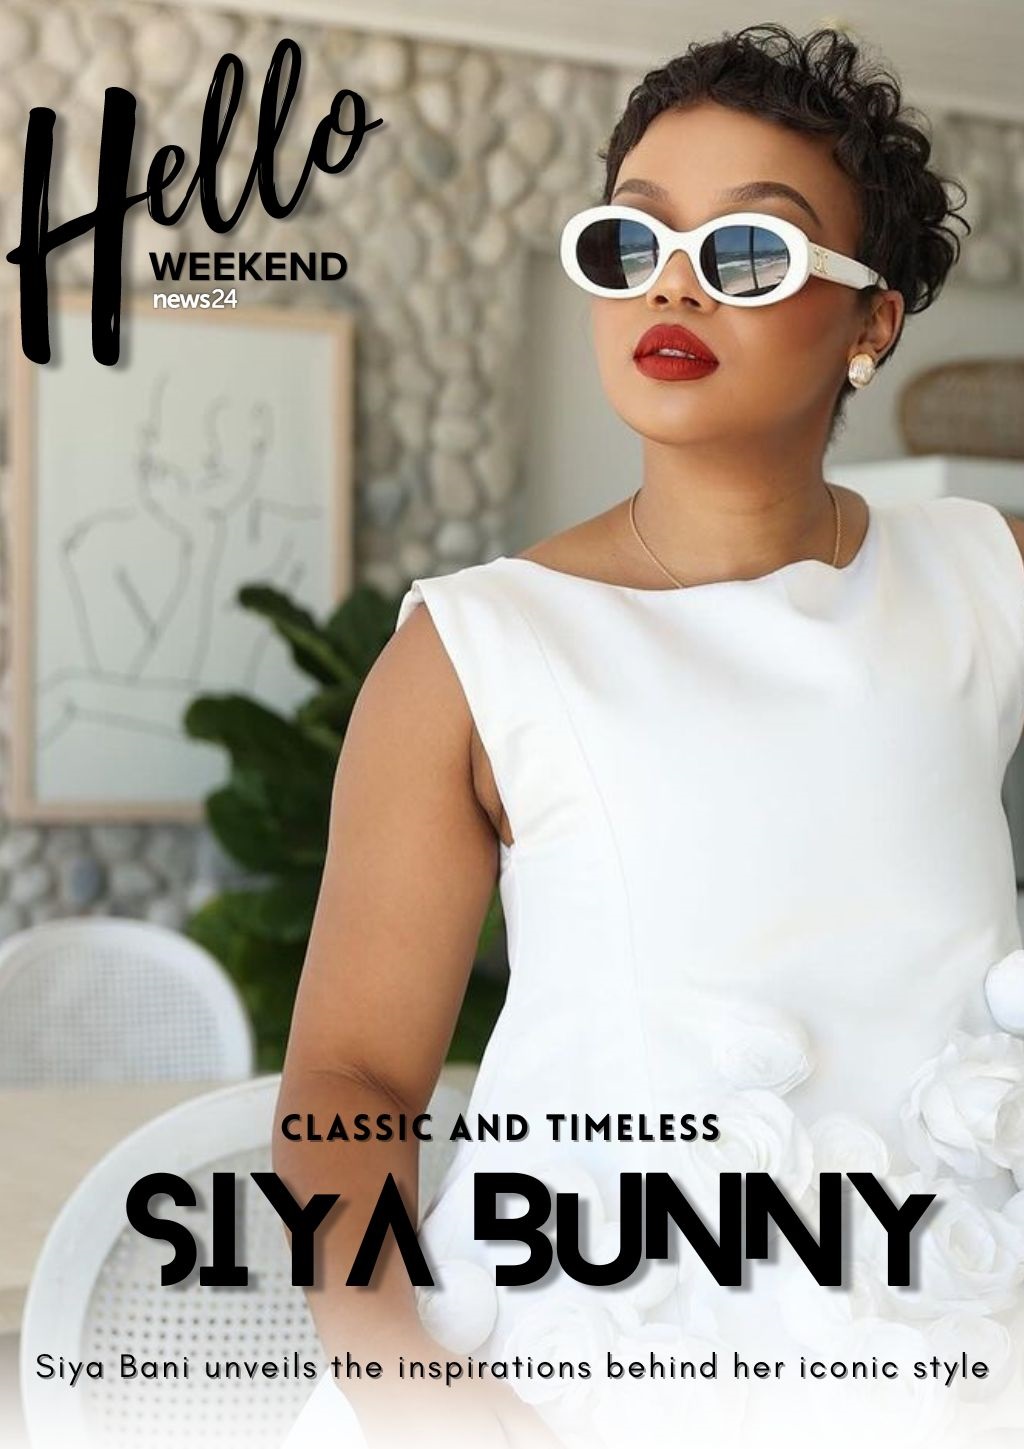 HELLO WEEKEND | Classic and timeless: Siya Bunny reveals the secrets behind her opulent fashion flair | Life